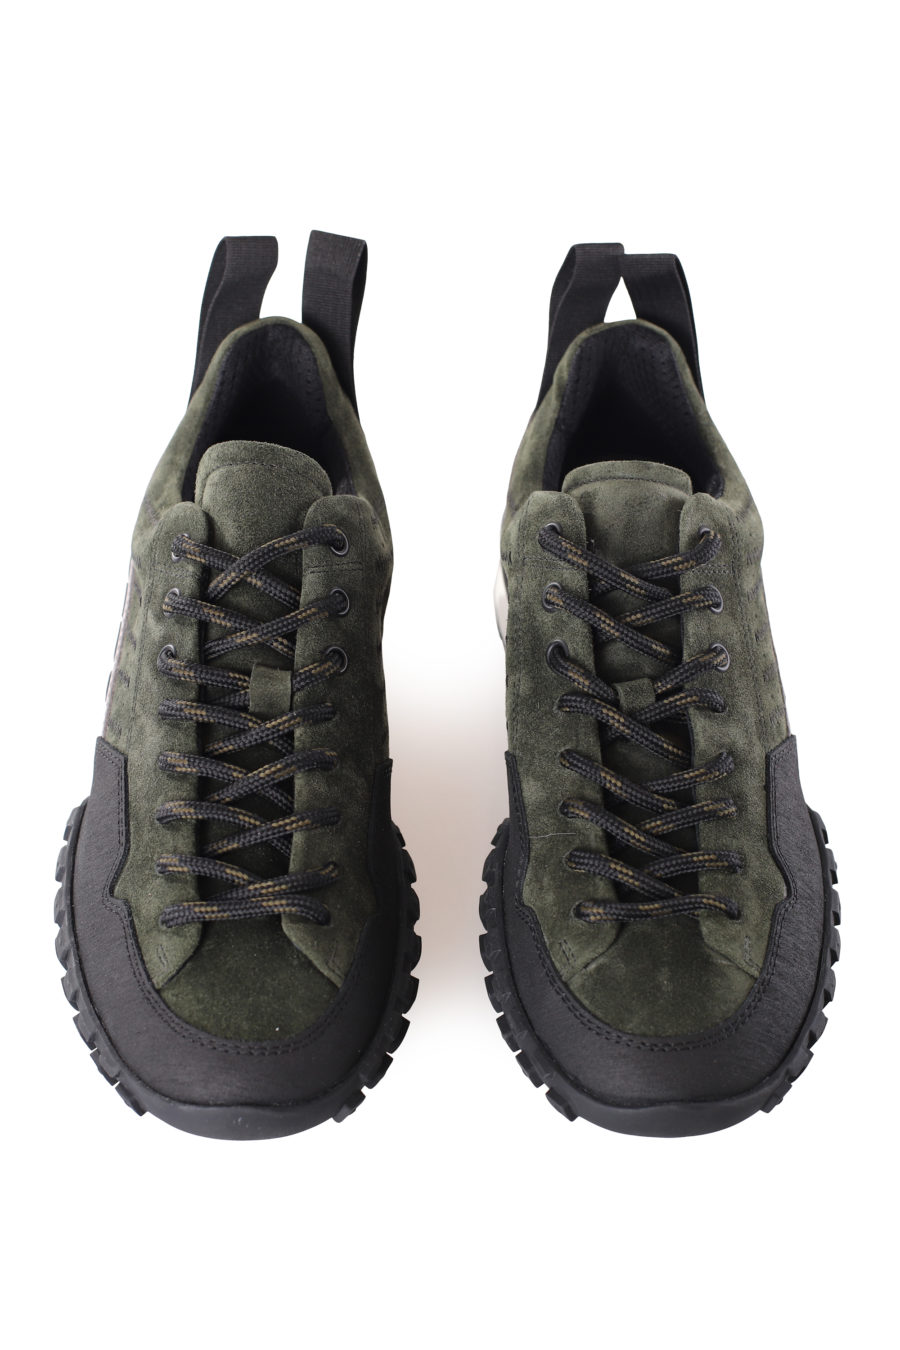 Black and army green canvas trainers with logo in ribbon - IMG 9544